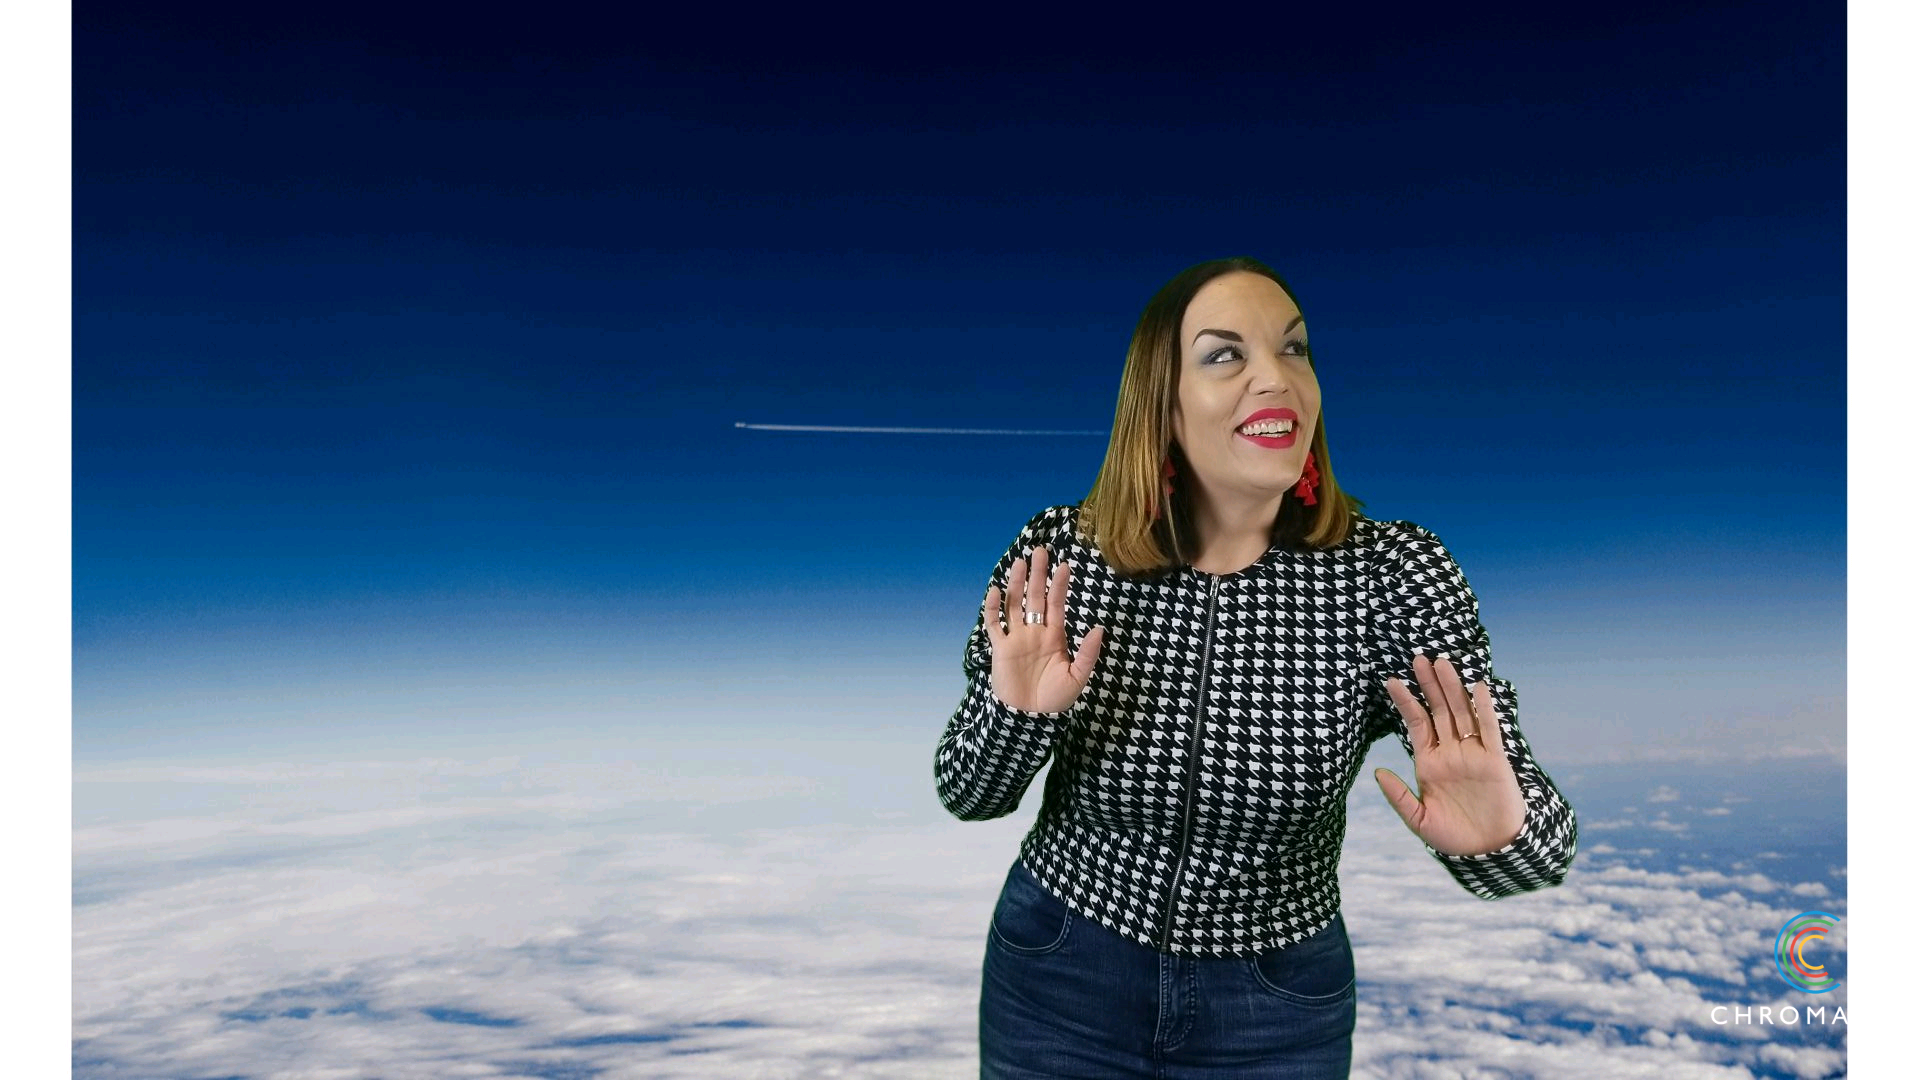 Tessa poses in front of a green screen which has been keyed to show a skyscape above the cloudline